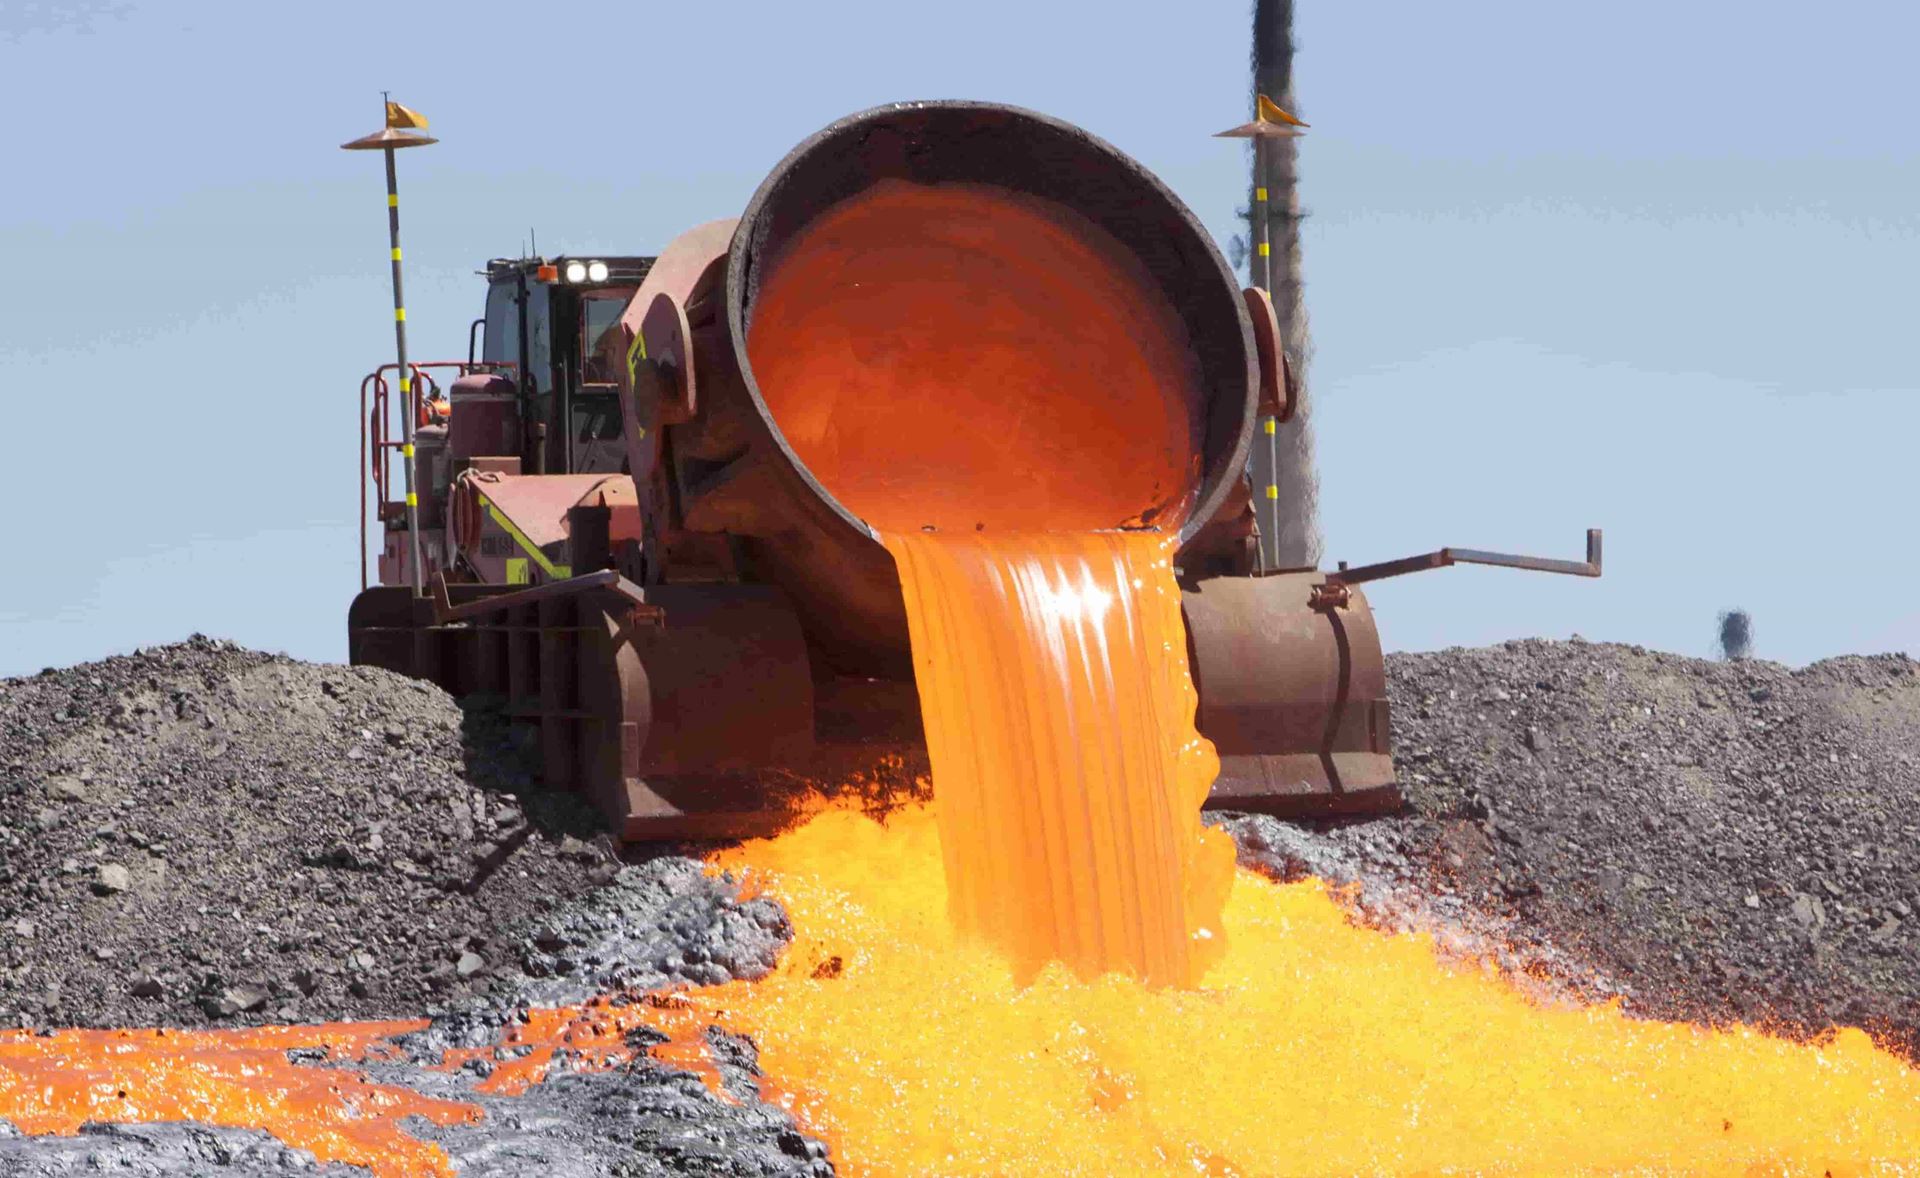 China's steel slag production increased